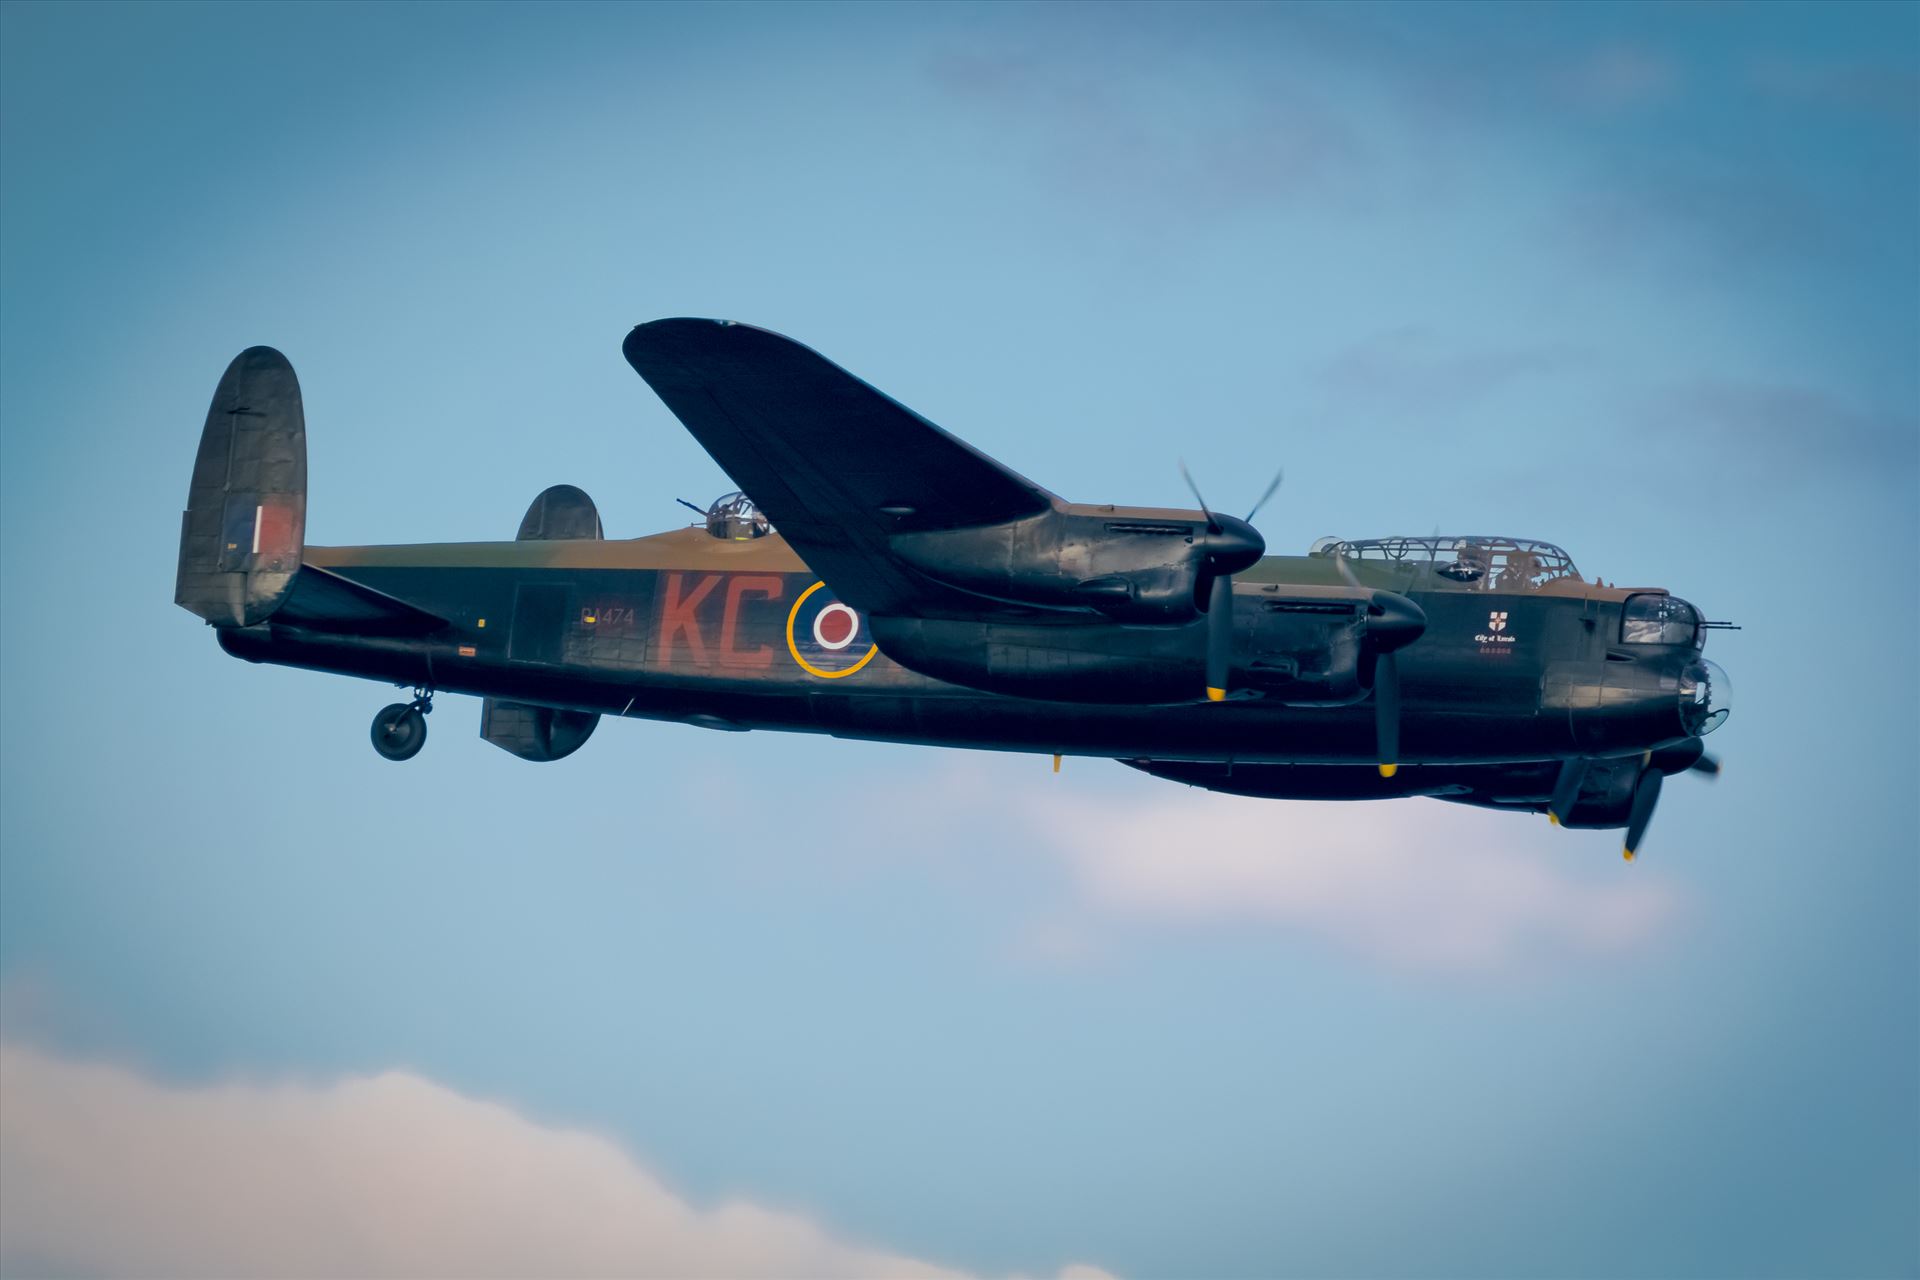 Lancaster Bomber Fly past of one of the most Iconic Planes in history and World War II, the Lancaster Bomber by AJ Stoves Photography